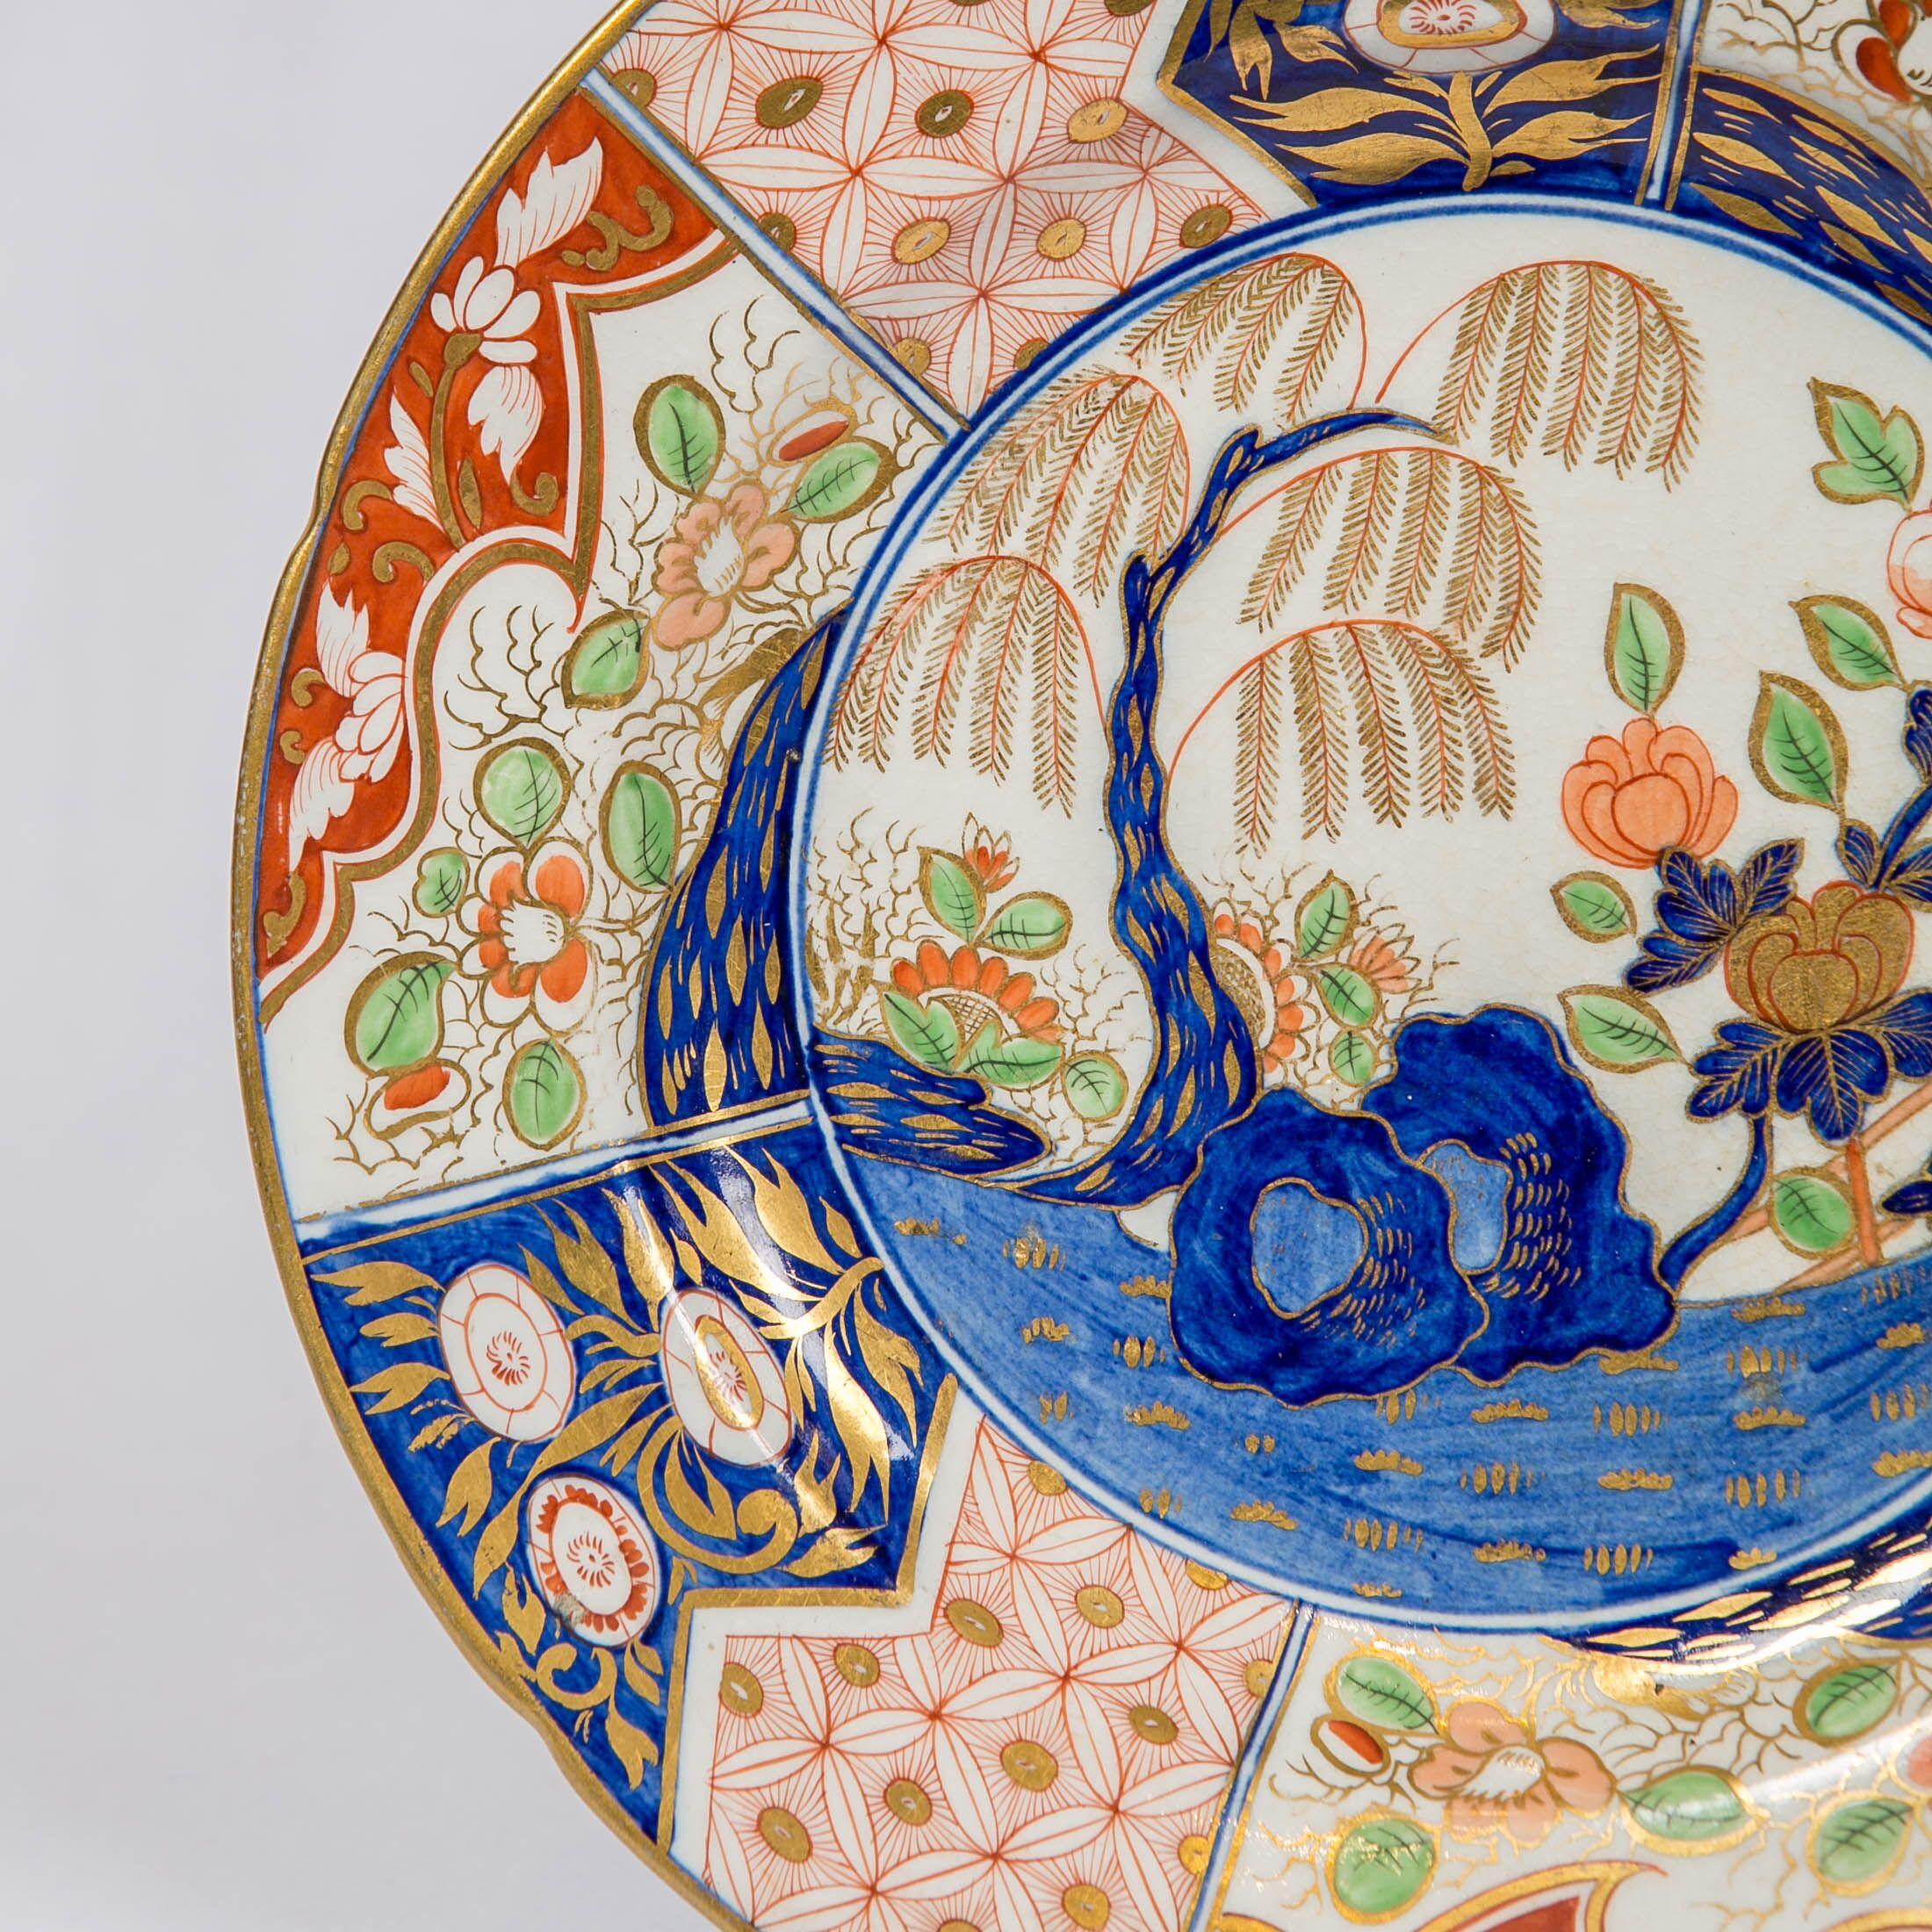 English Set of Rock and Tree-Pattern Dinner Plates Made in England, circa 1820